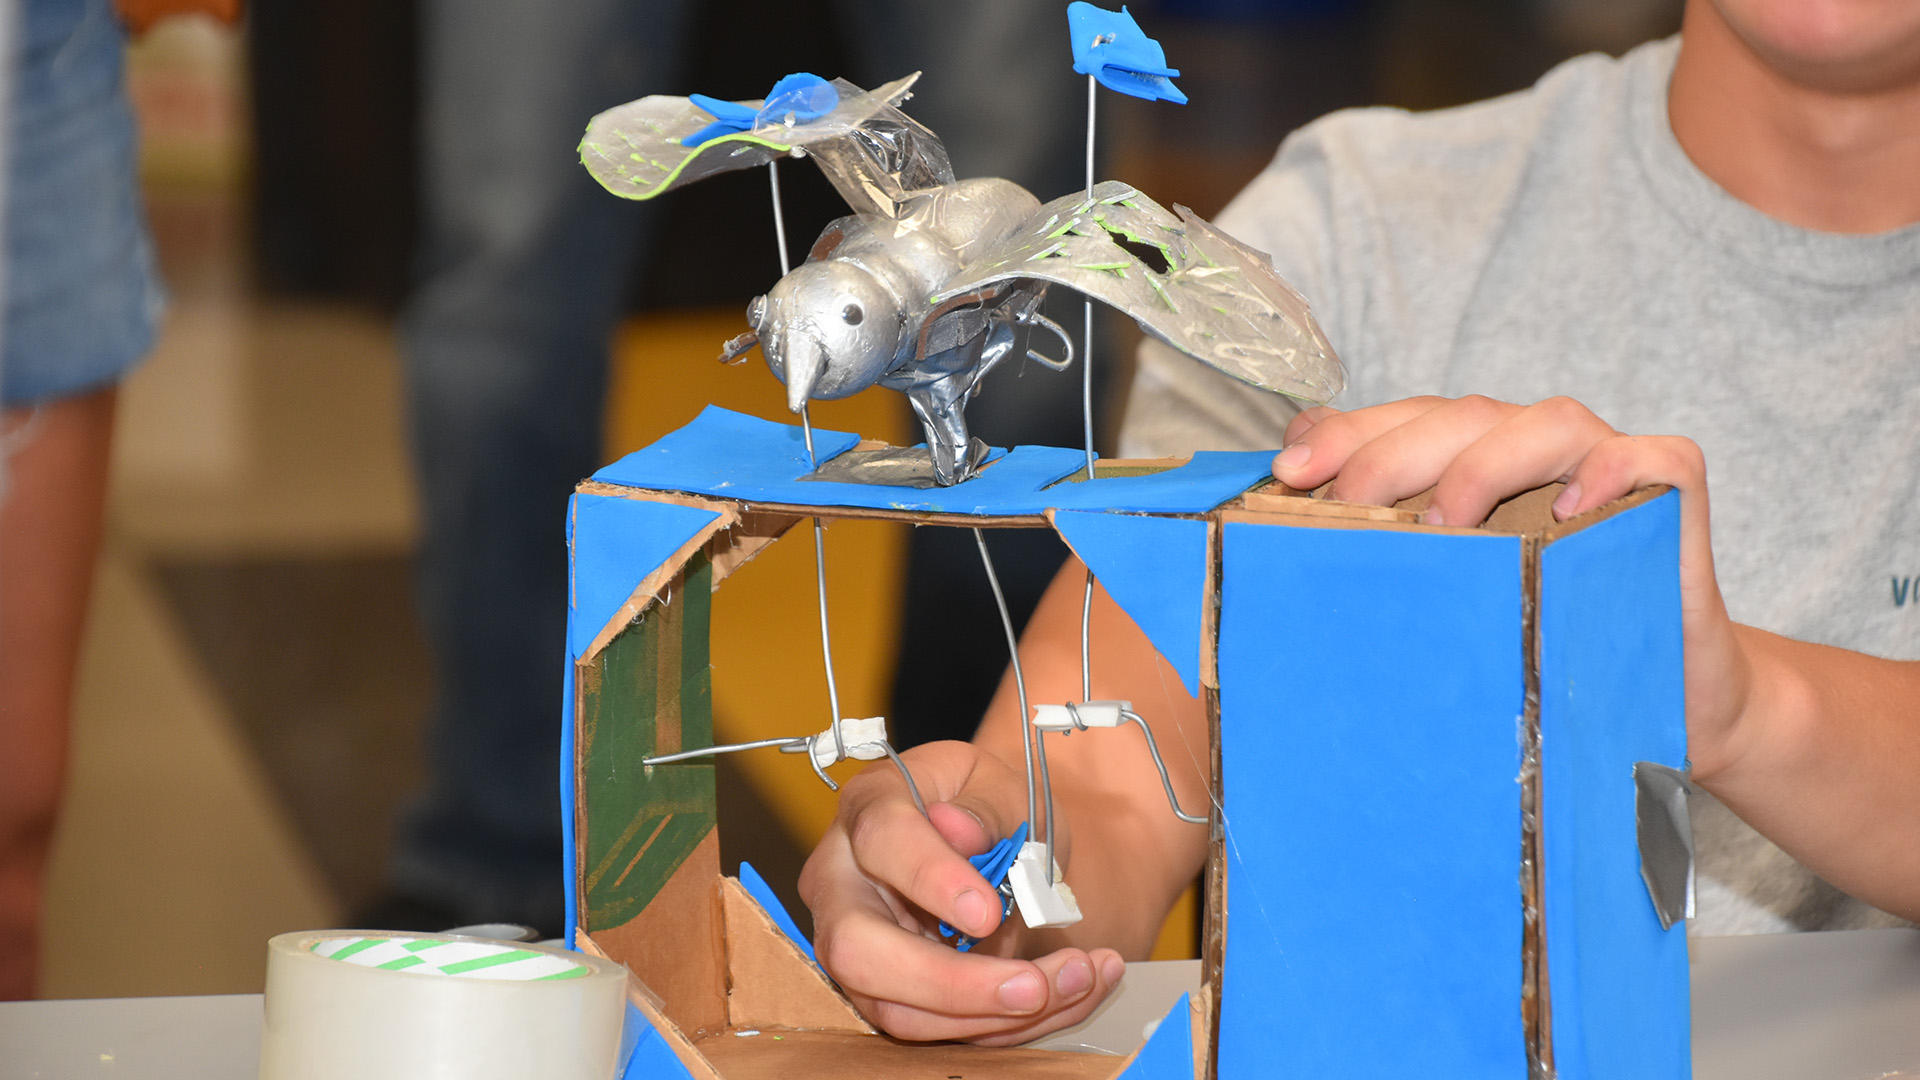 A child works on a robotic bird with flapping wings as part of a summer camp.